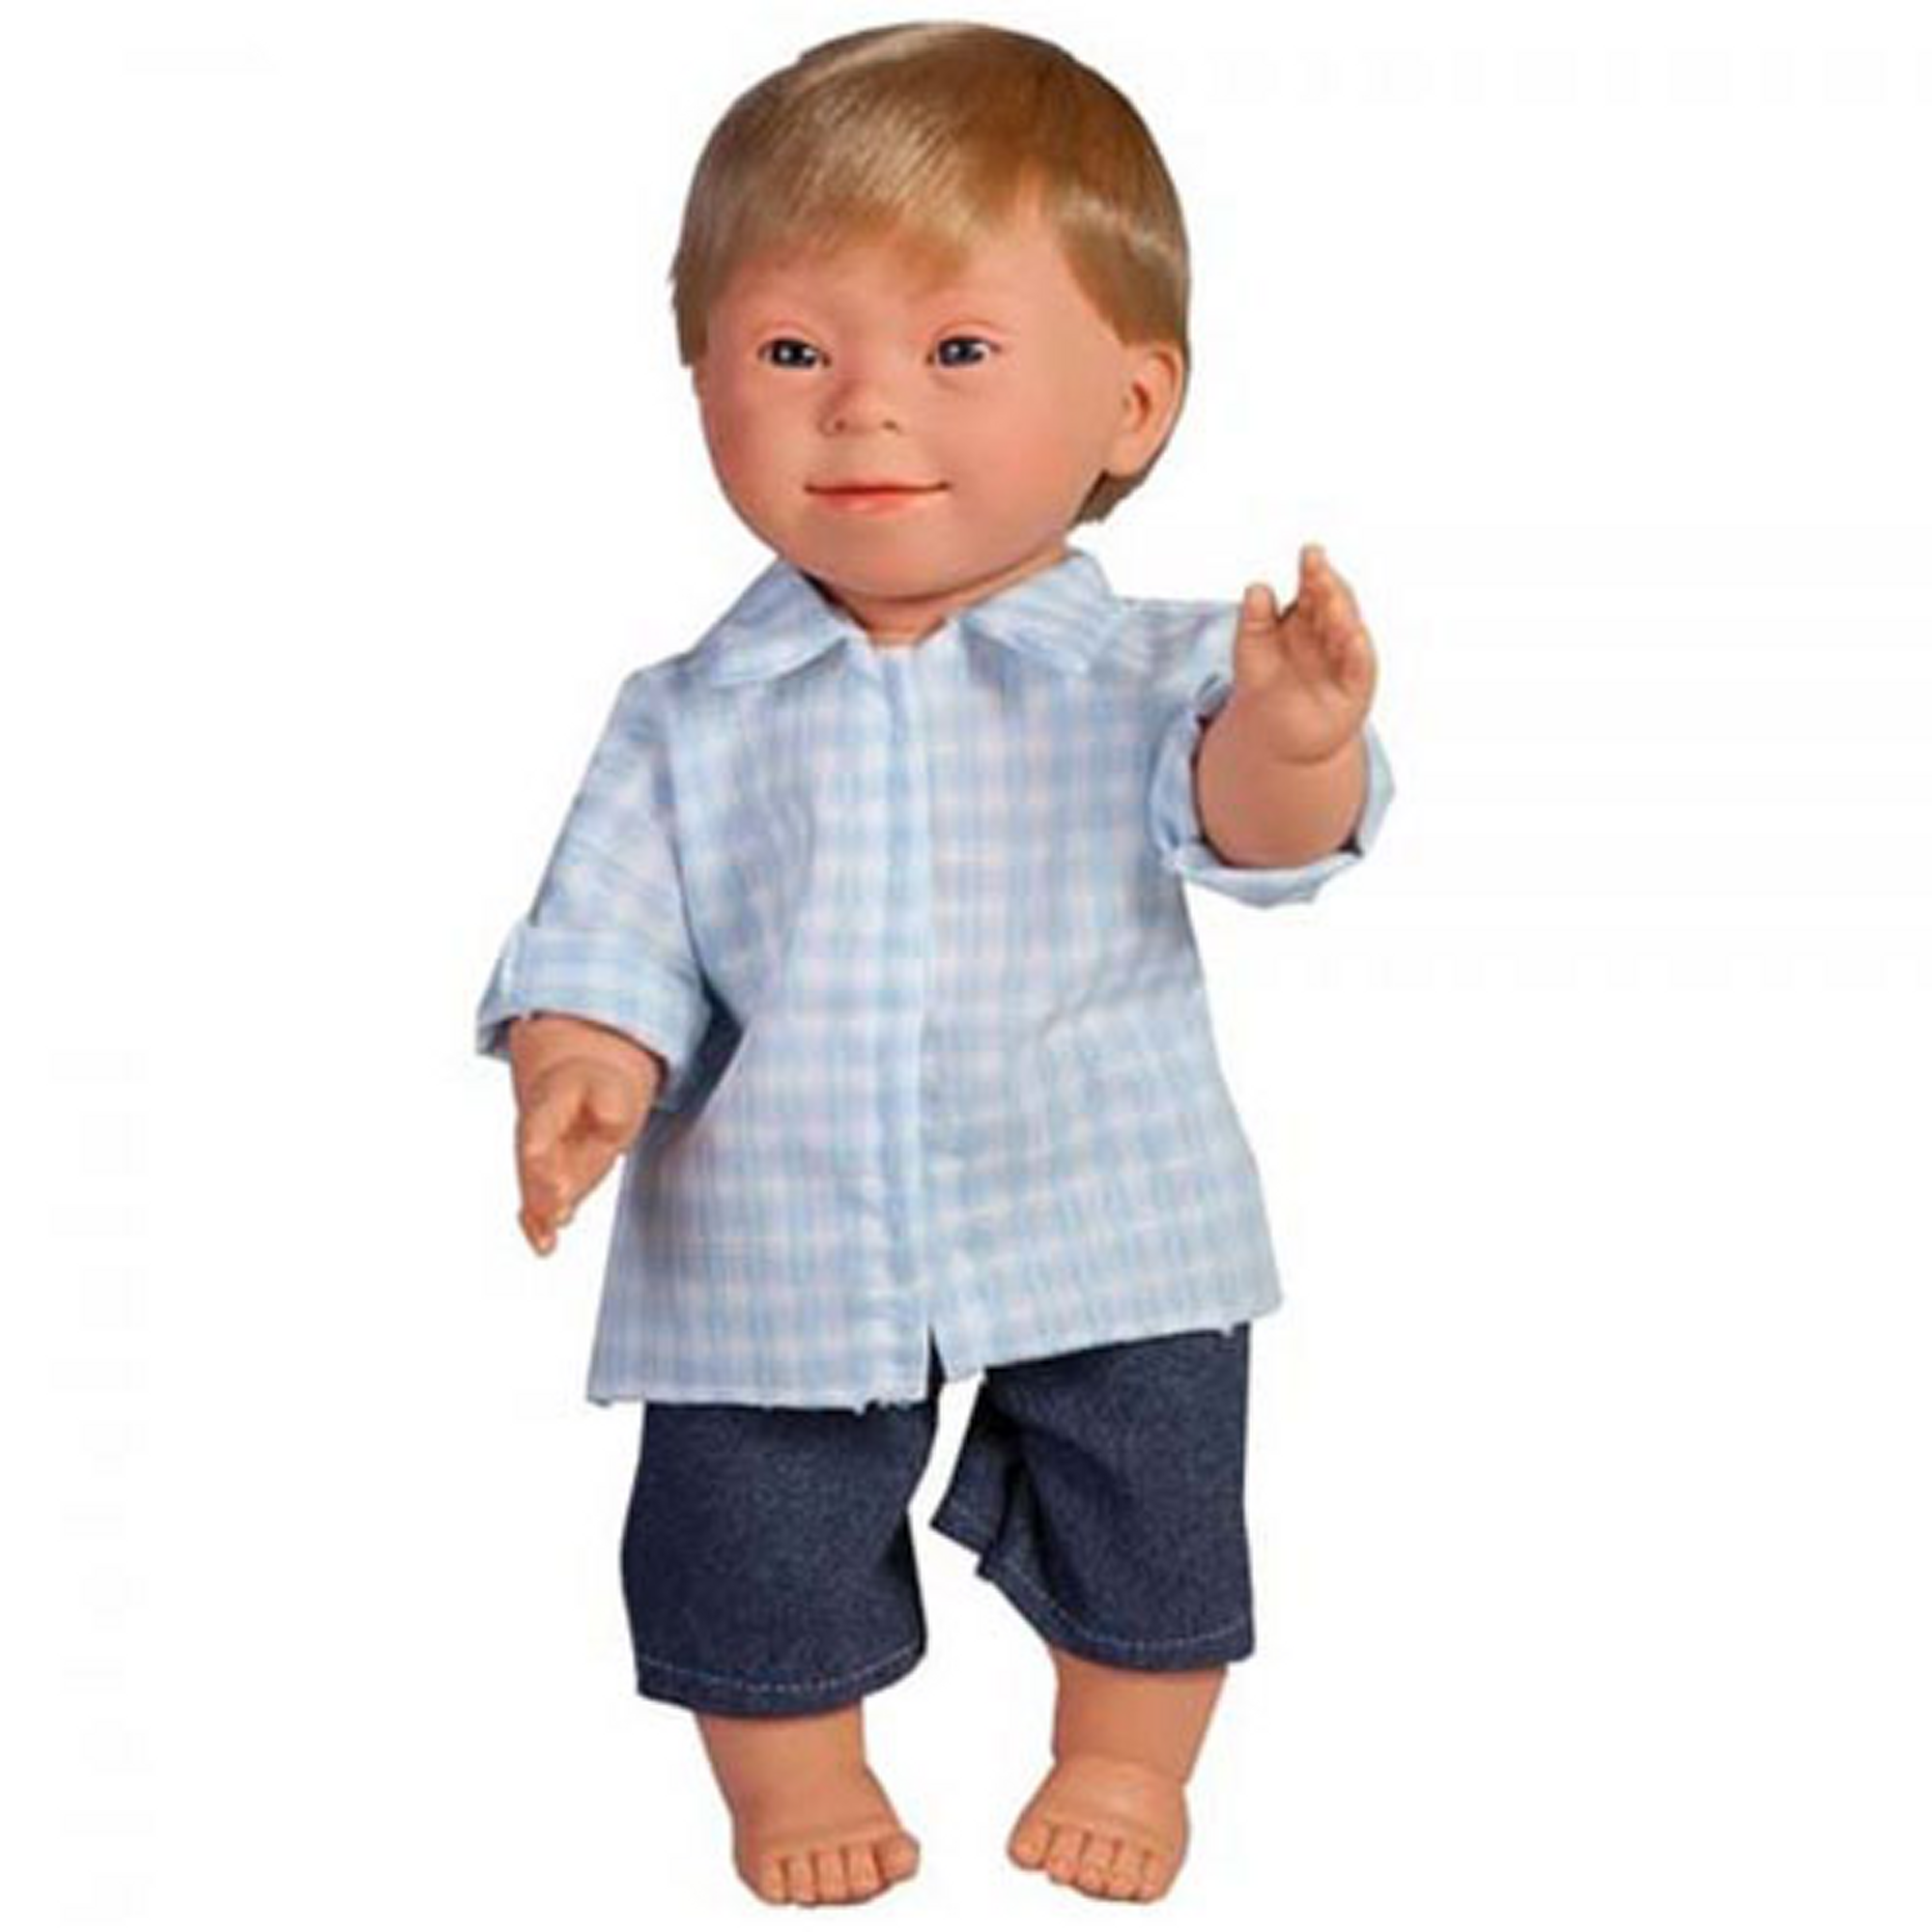 Boy Doll With Downs Syndrome Blonde Hair